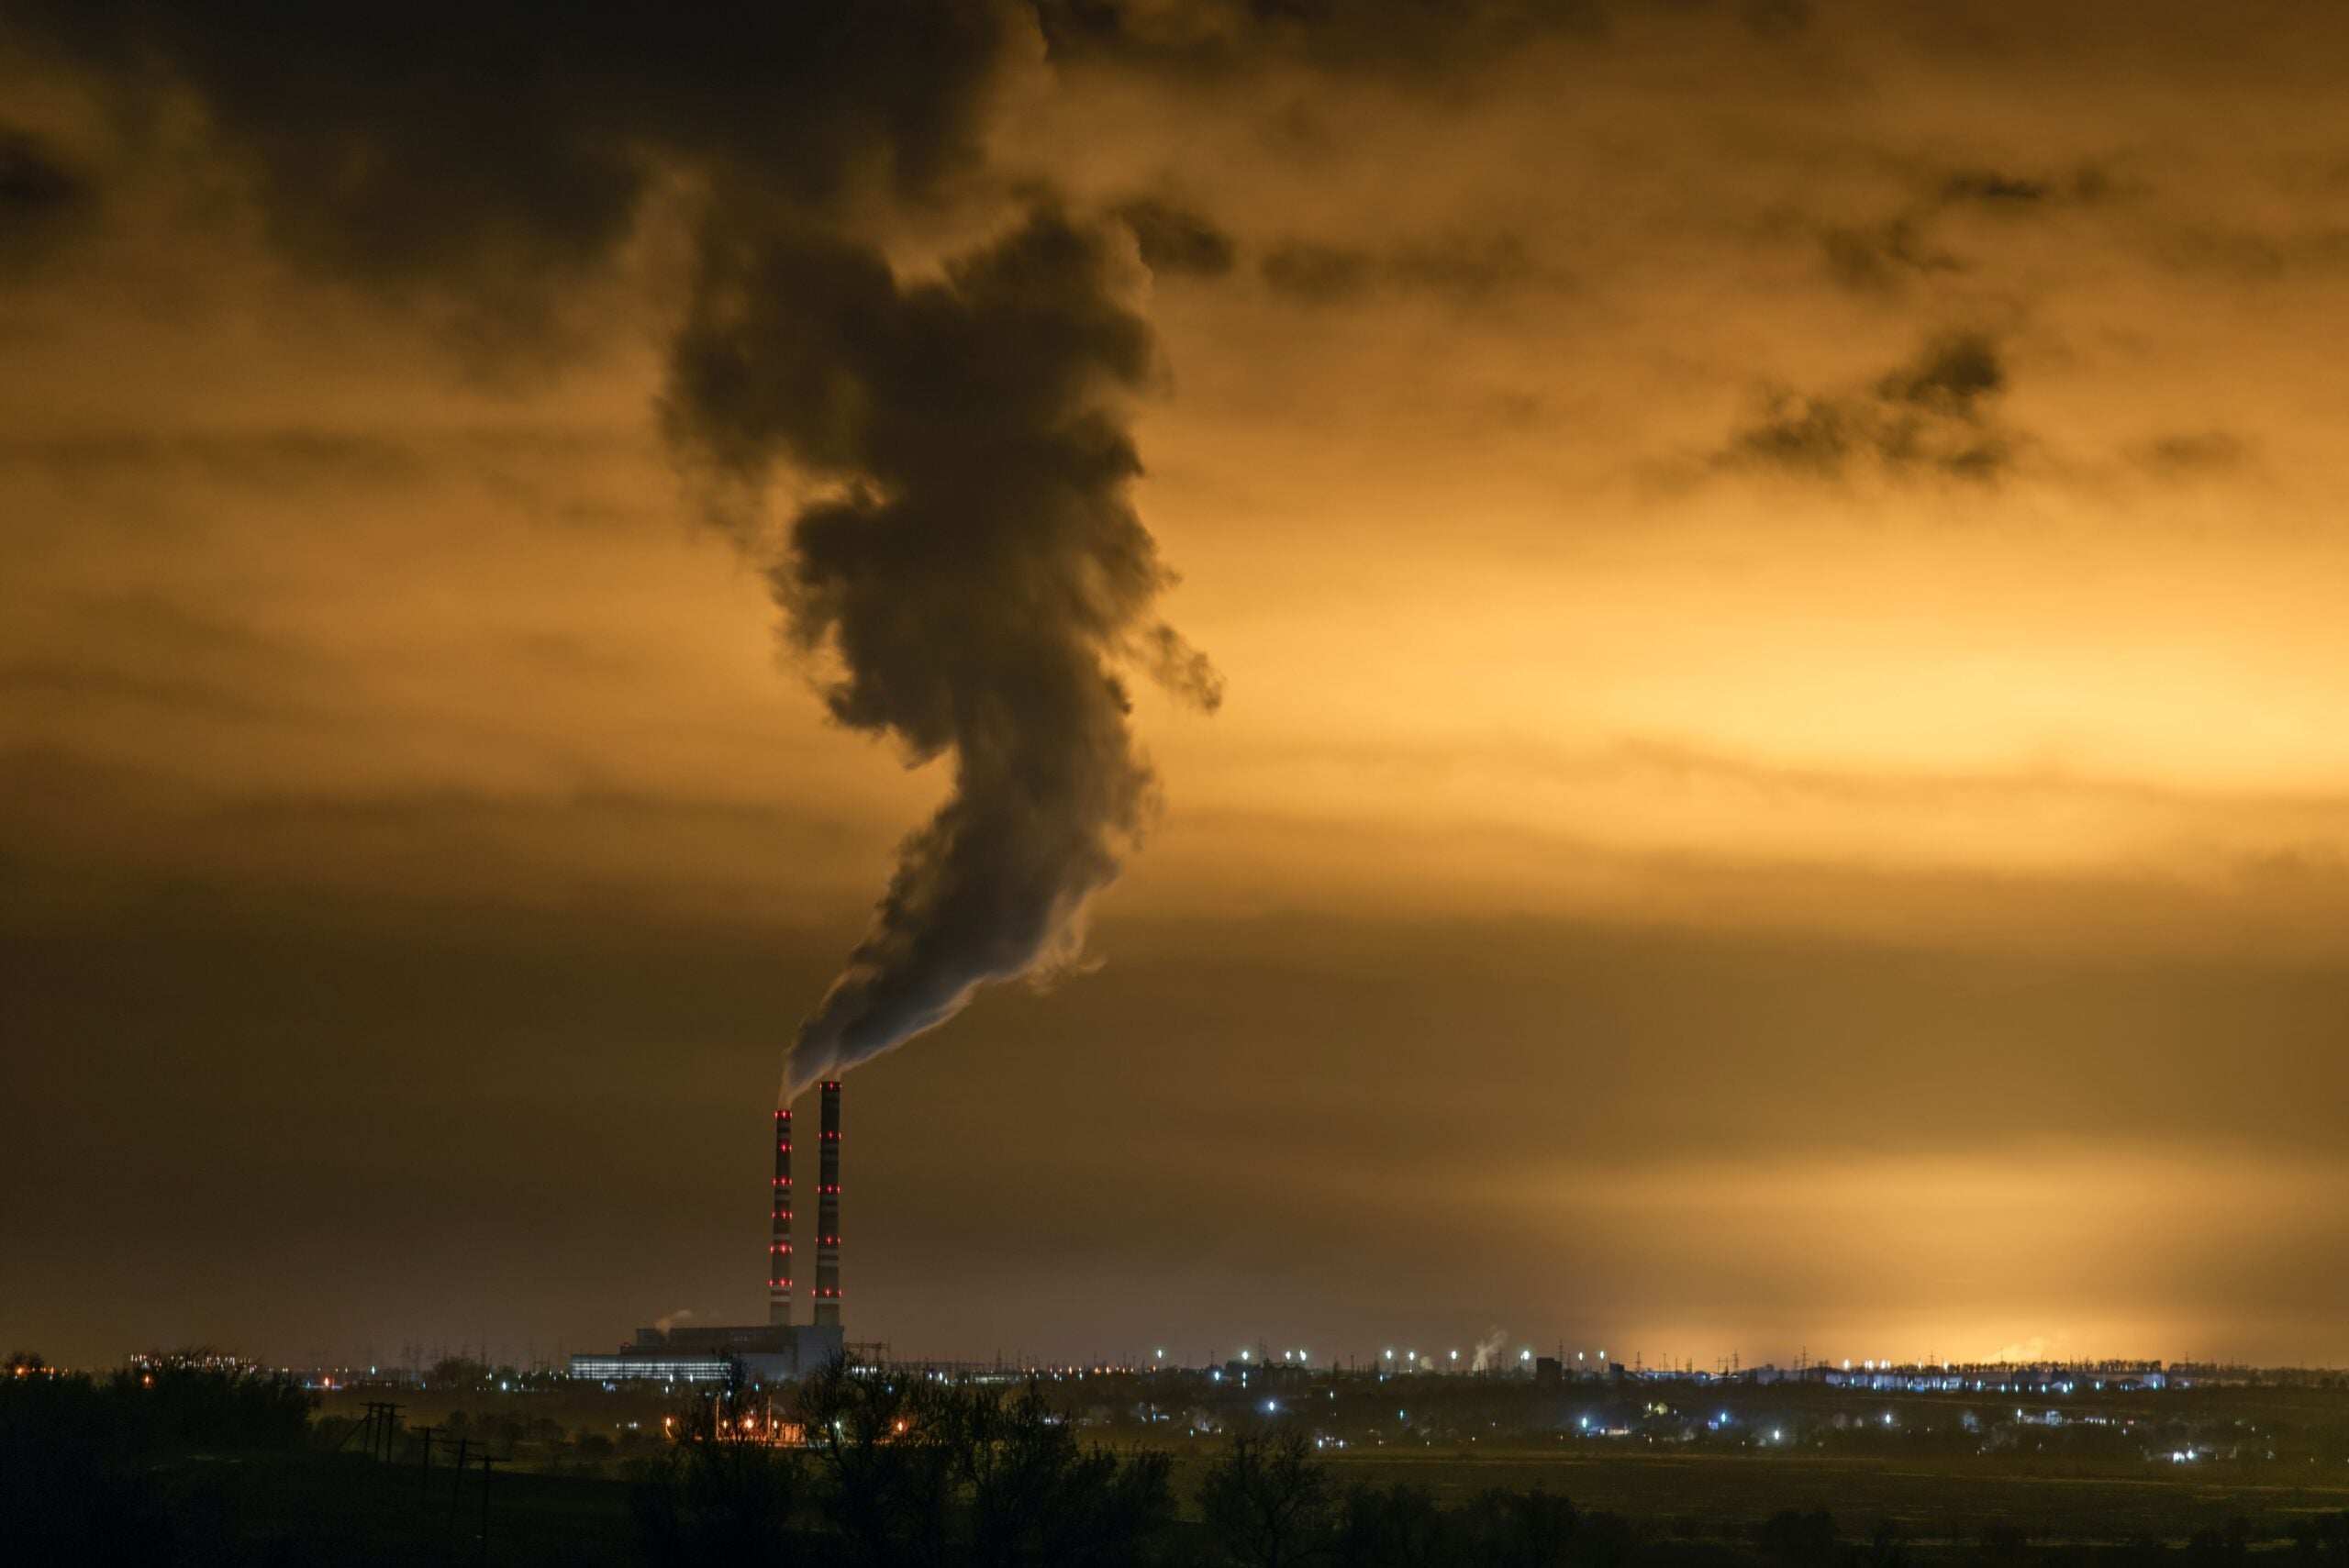 Current carbon developments would lock in unsustainable future